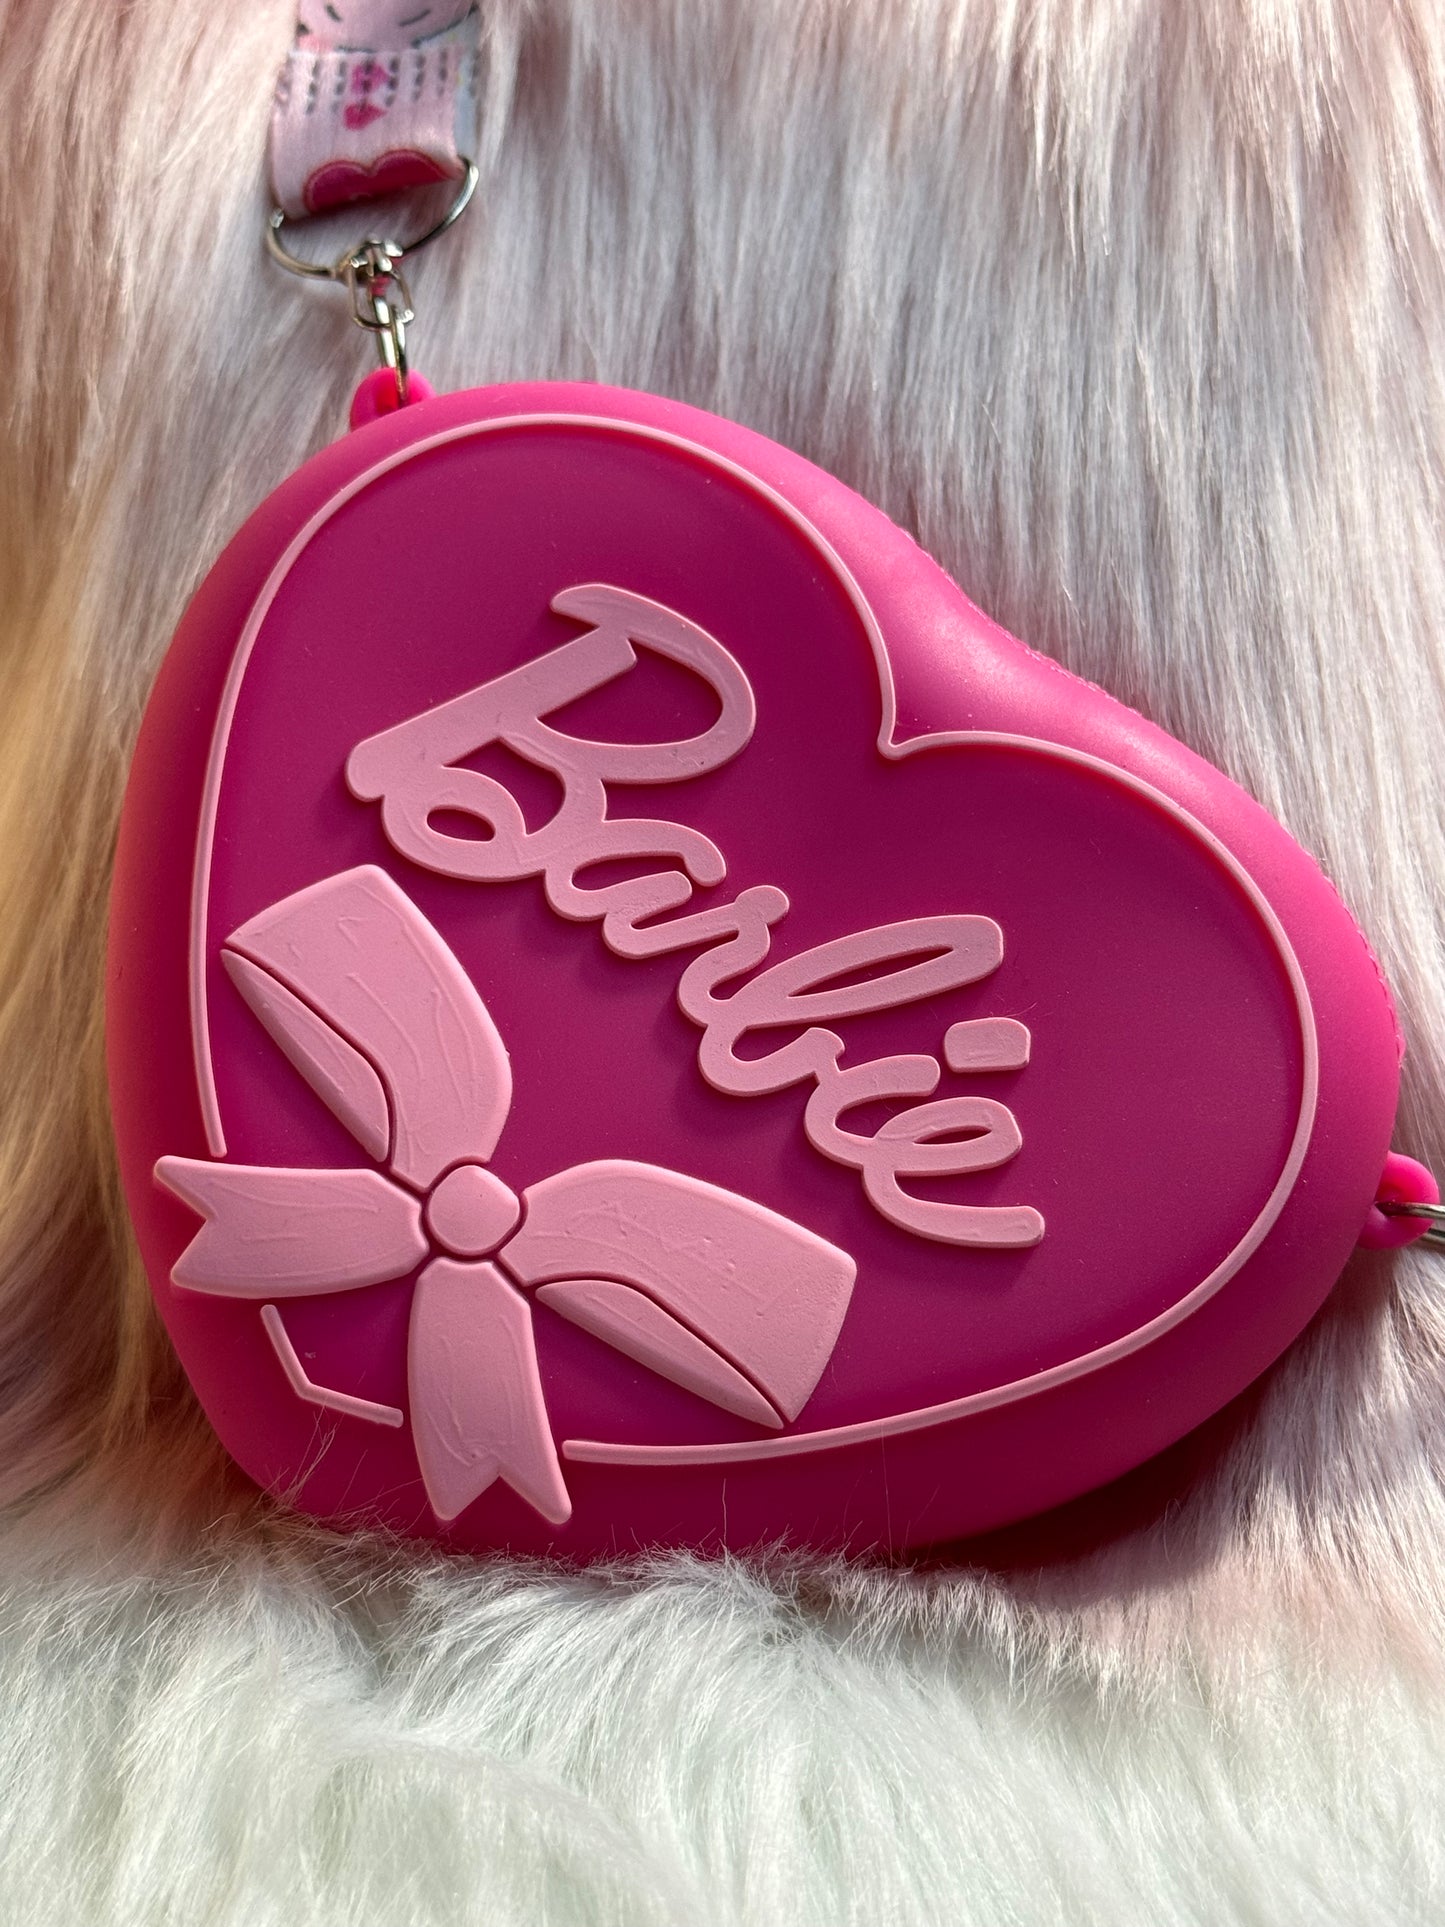 Barbie Purse and Accessories